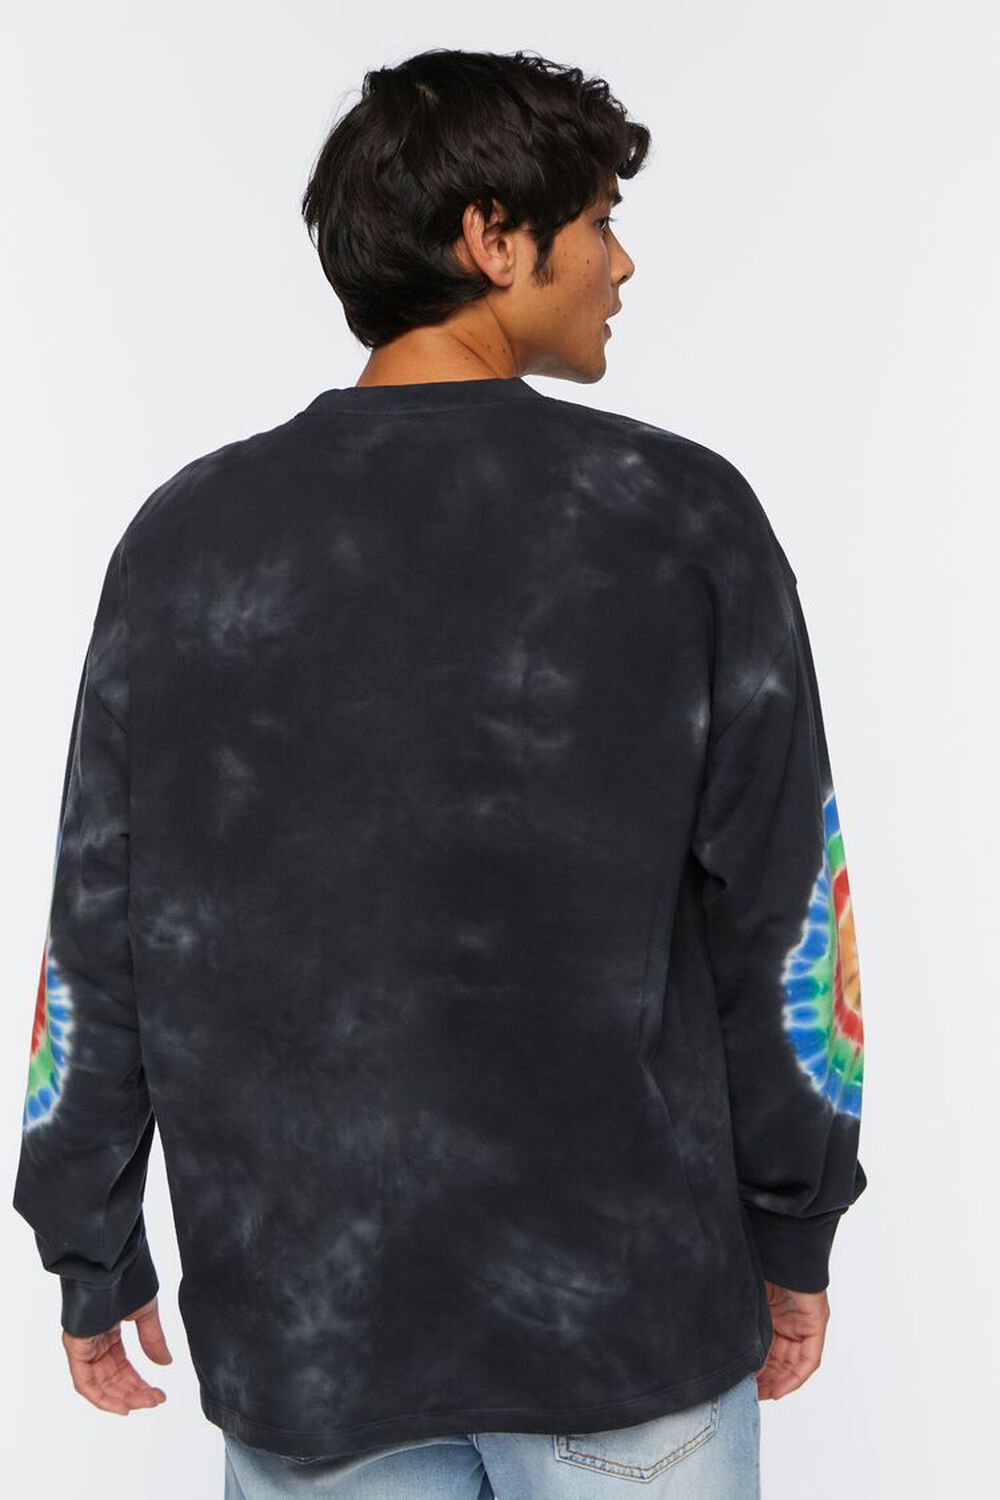 BLACK/MULTI Tie-Dye French Terry Pullover, image 3